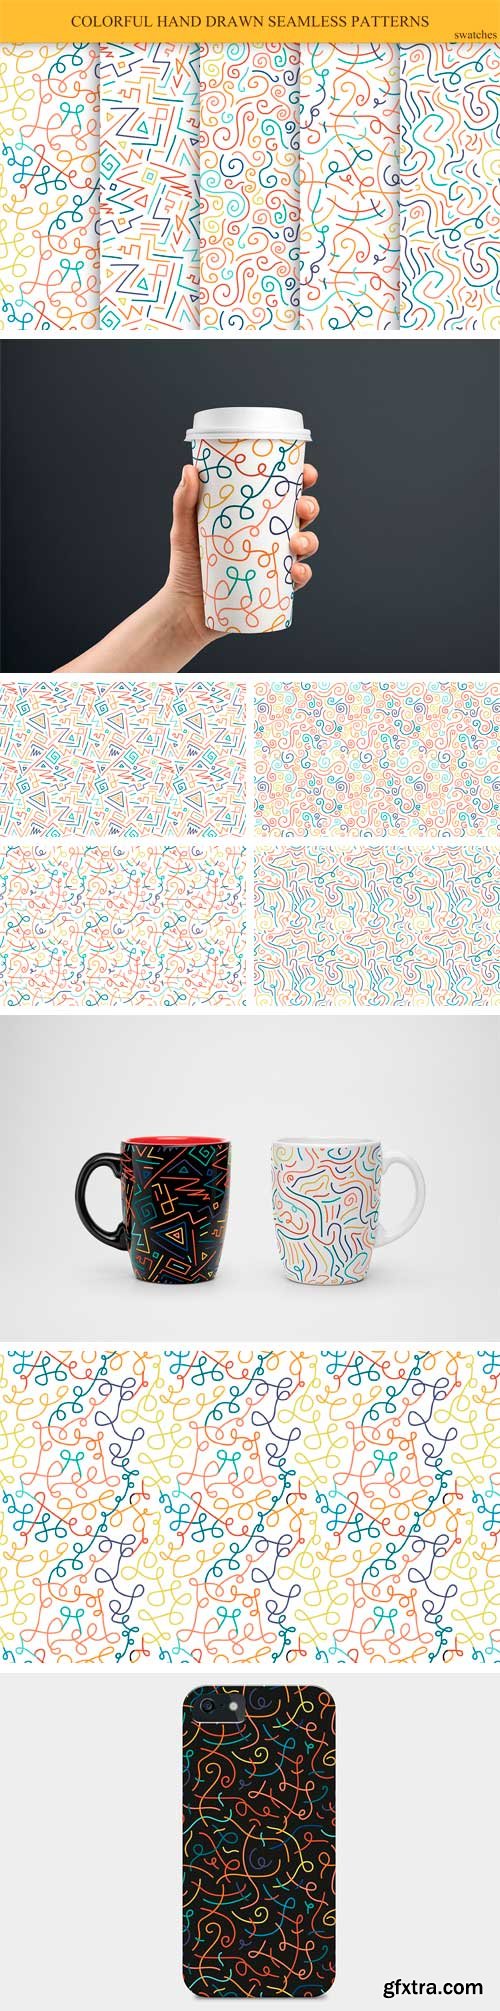 CM 1165901 - Hand Drawn Seamless Color Patterns